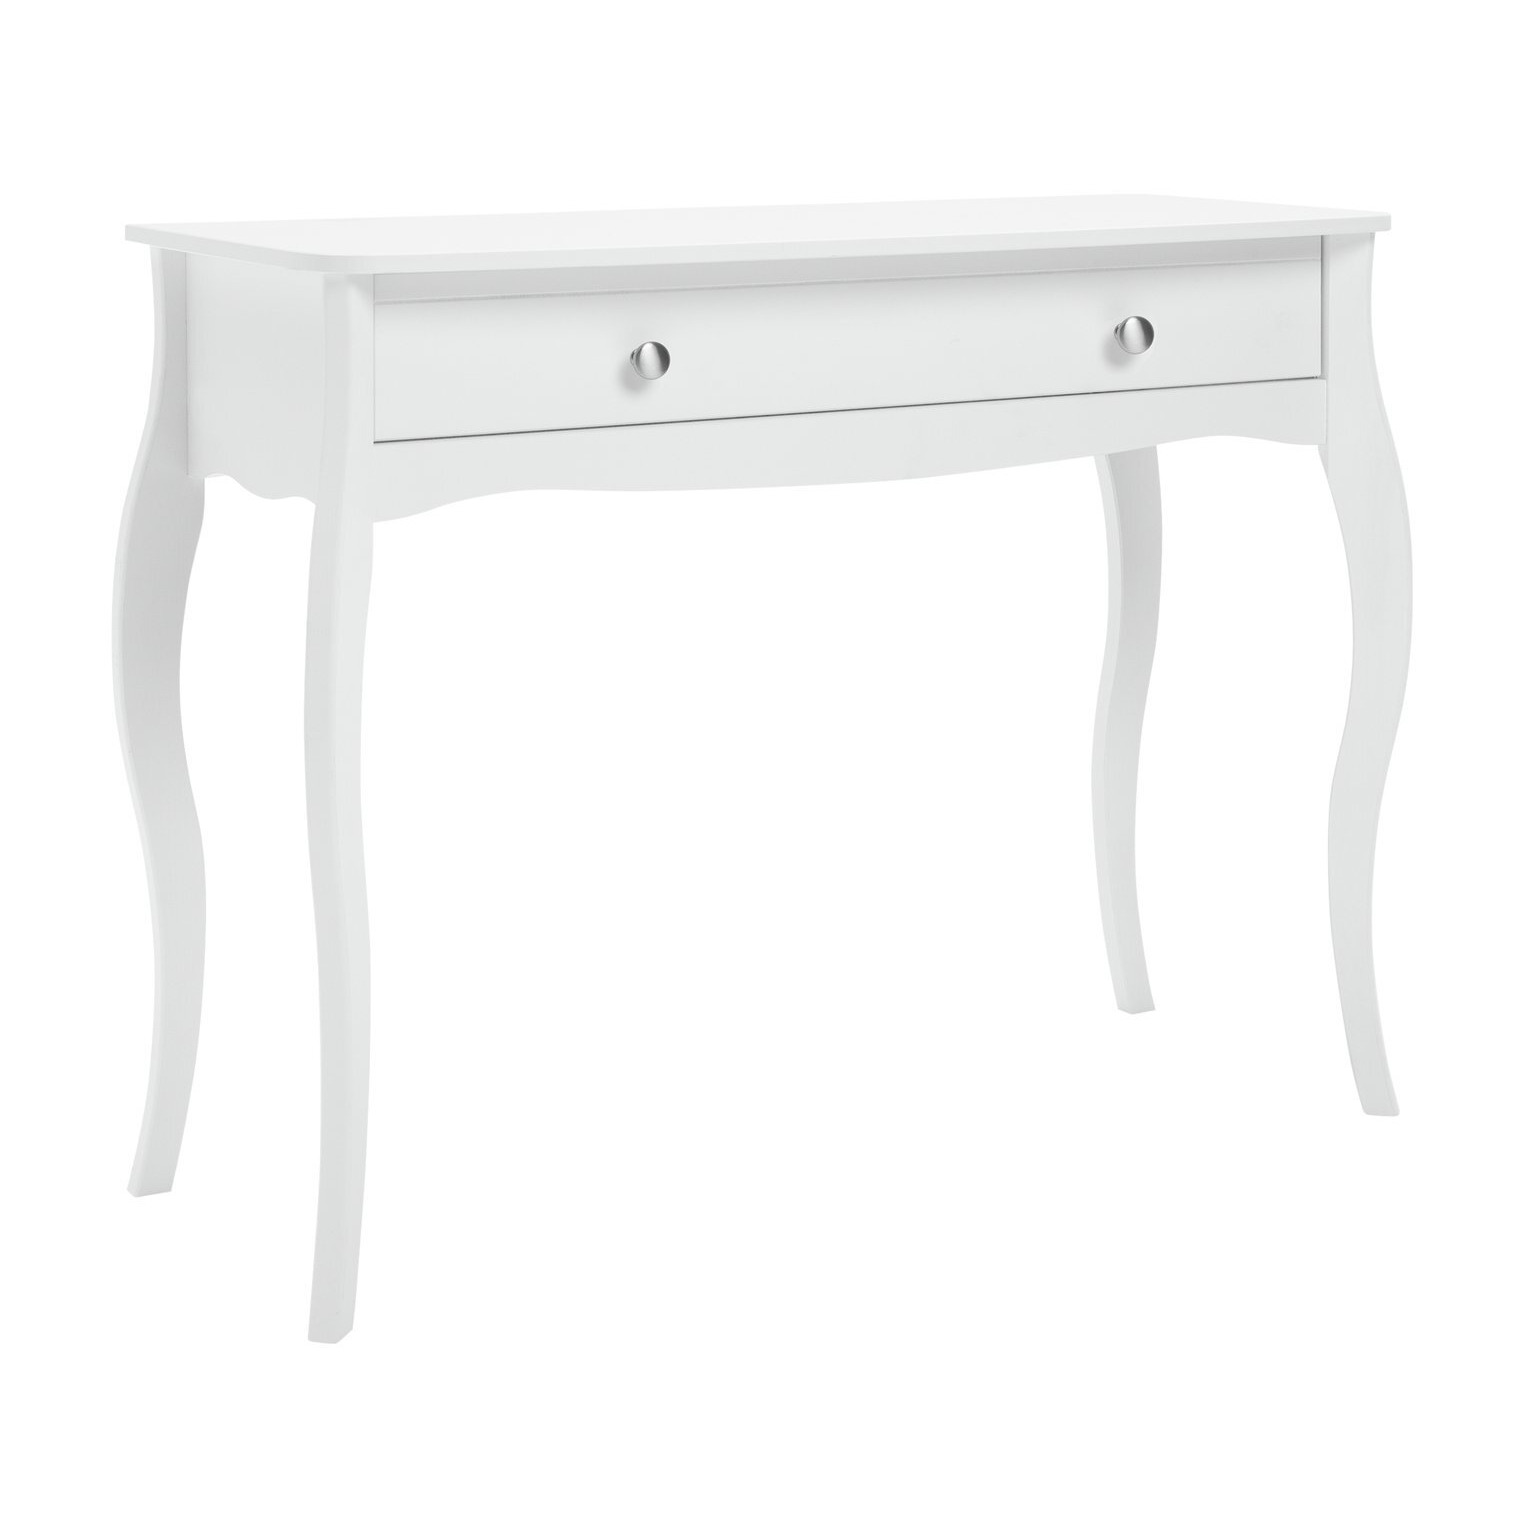 Argos Home Amelie 1 Drawer Dressing Table - White - image 1